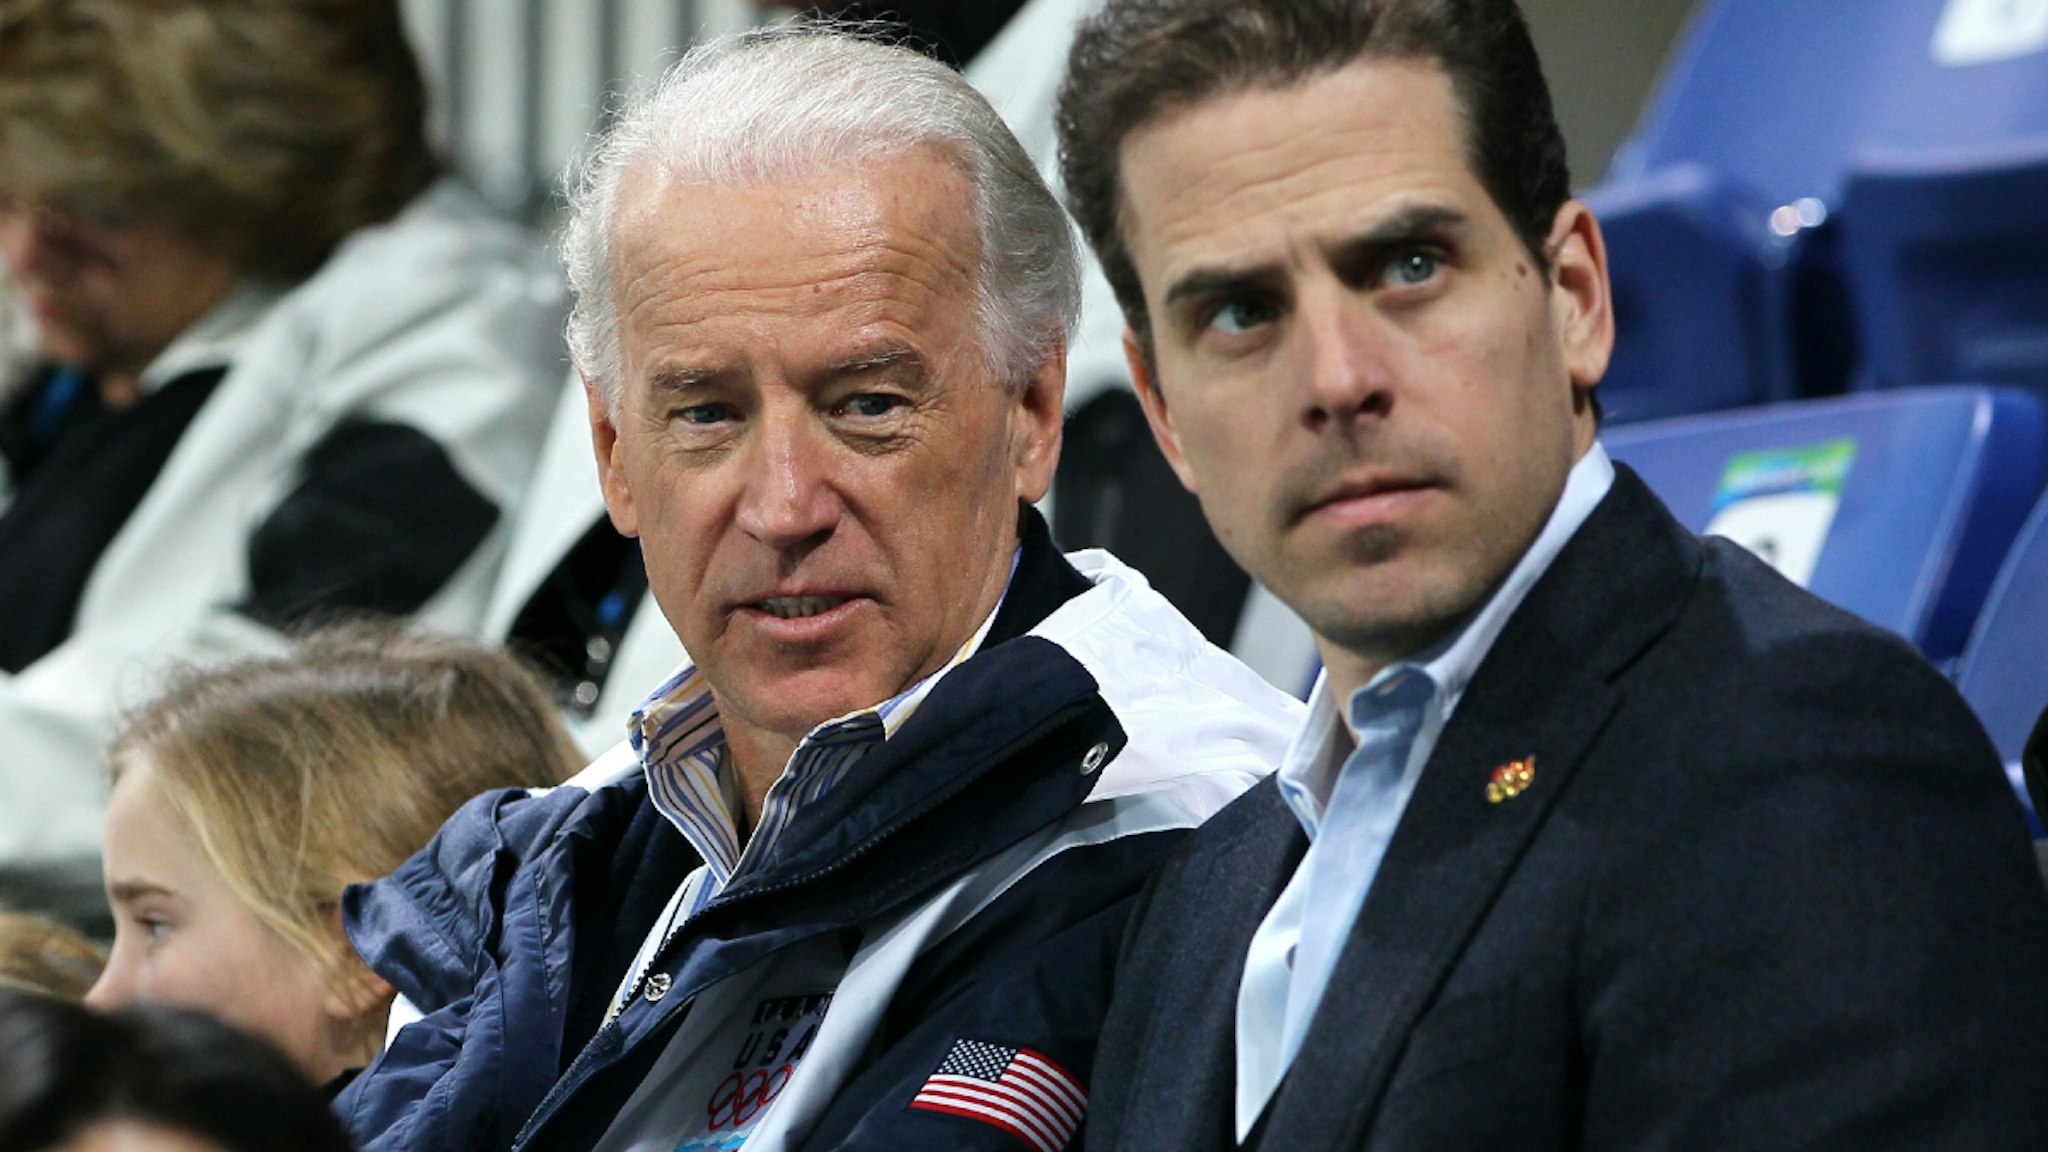 VANCOUVER, BC - FEBRUARY 14: United States vice-president Joe Biden (L) and his son Hunter Biden (R) attend a women's ice hockey preliminary game between United States and China at UBC Thunderbird Arena on February 14, 2010 in Vancouver, Canada.